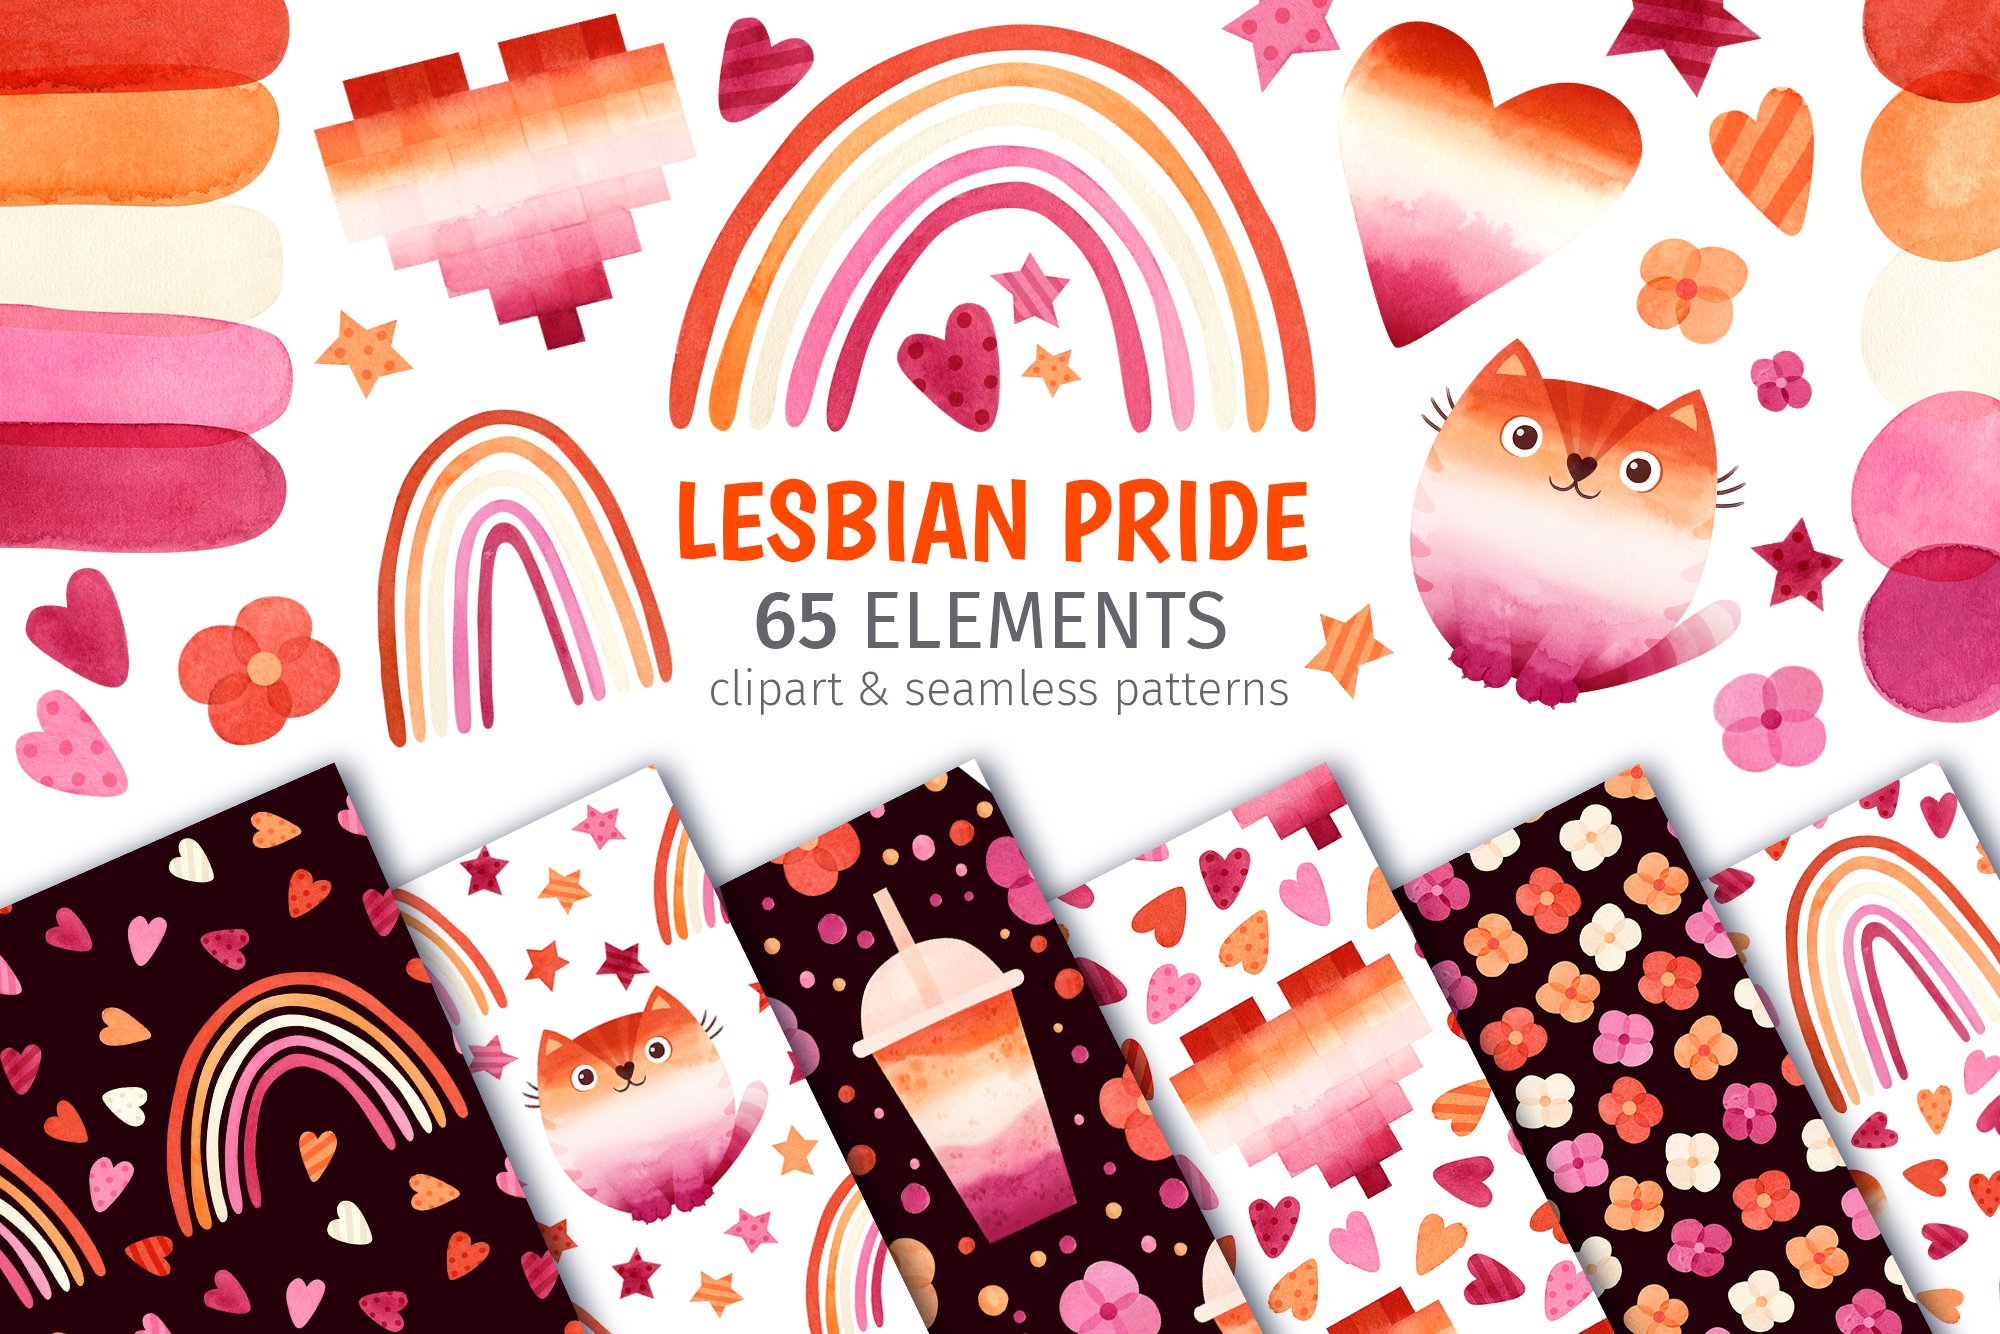 Lesbian pride clipart & patterns cover image.